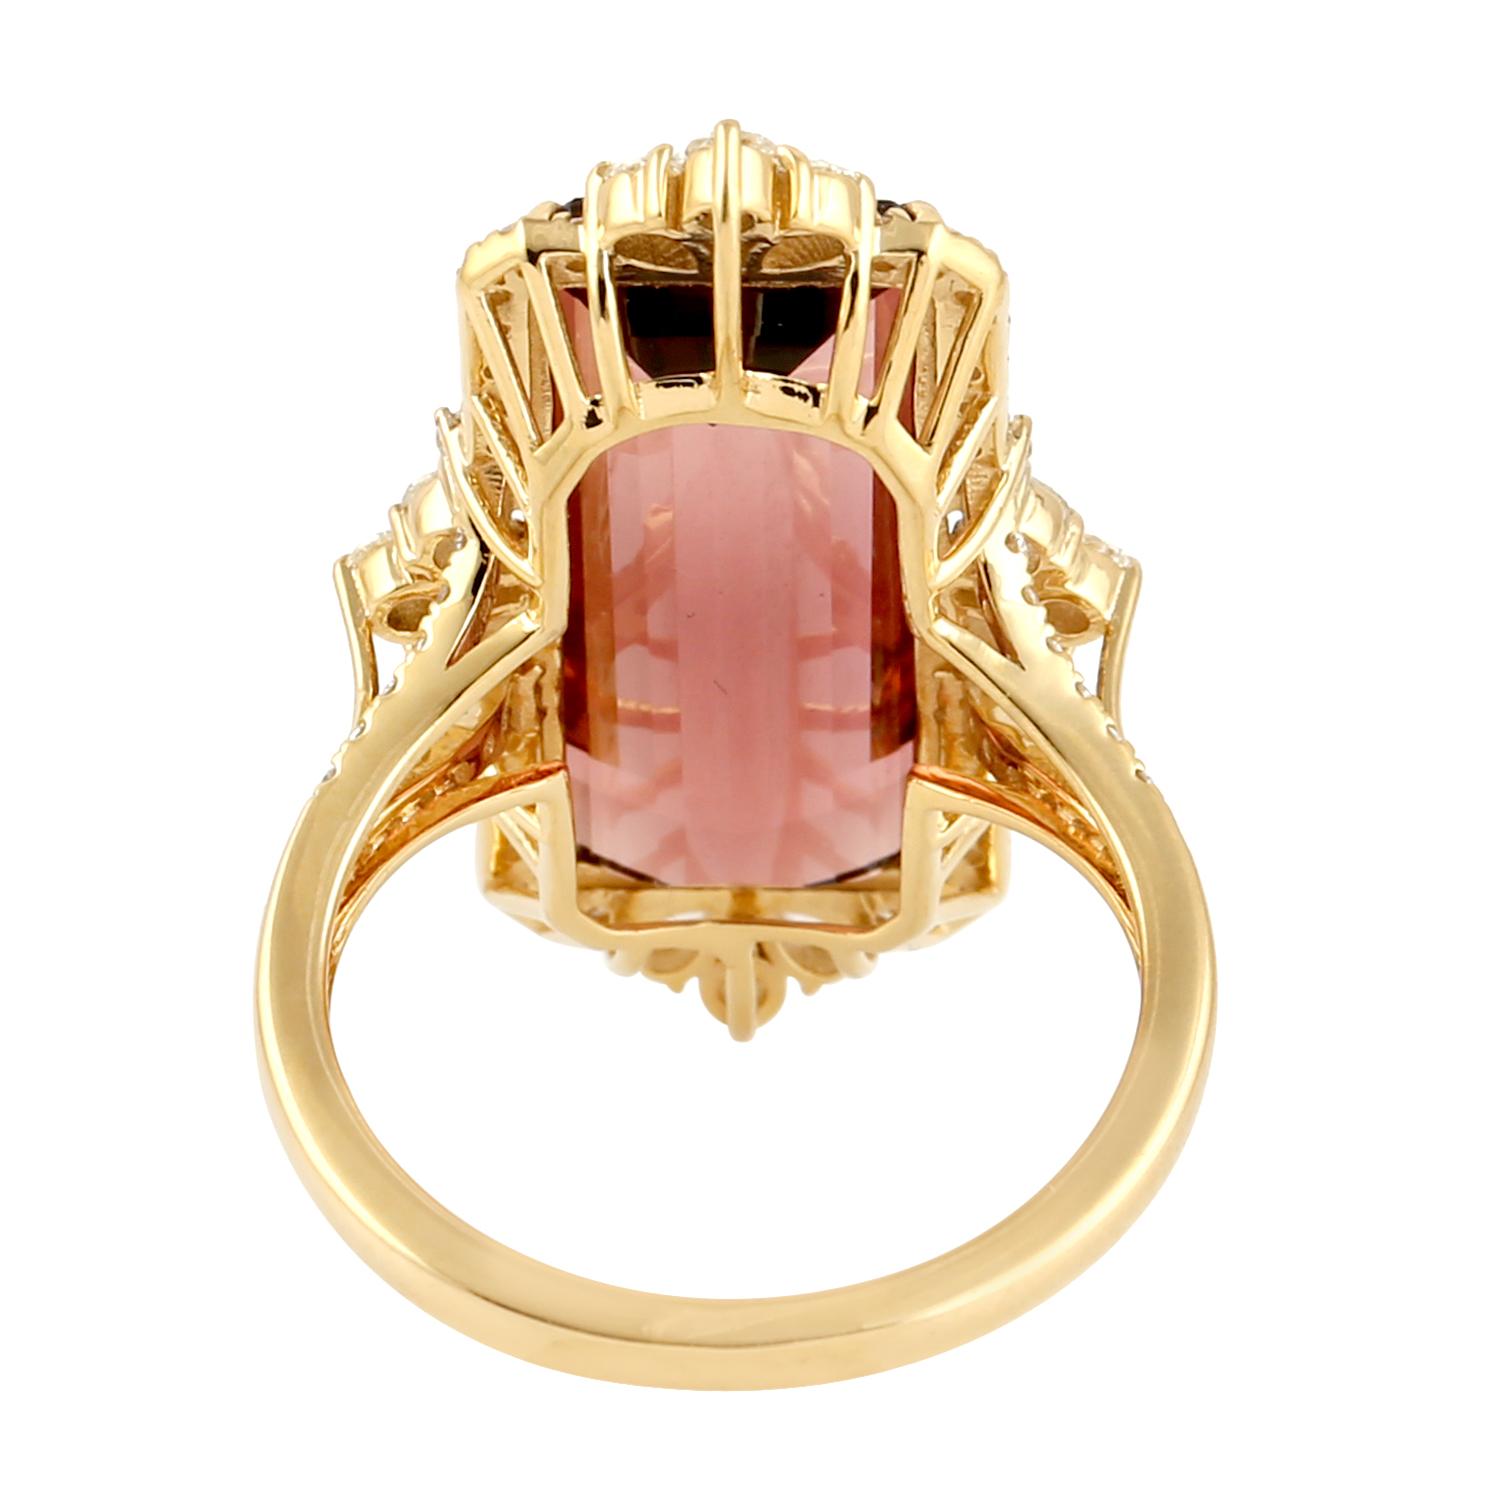 Mixed Cut Pink Tourmaline Cocktail Ring Wth Diamonds Made in 18k Yellow Gold For Sale